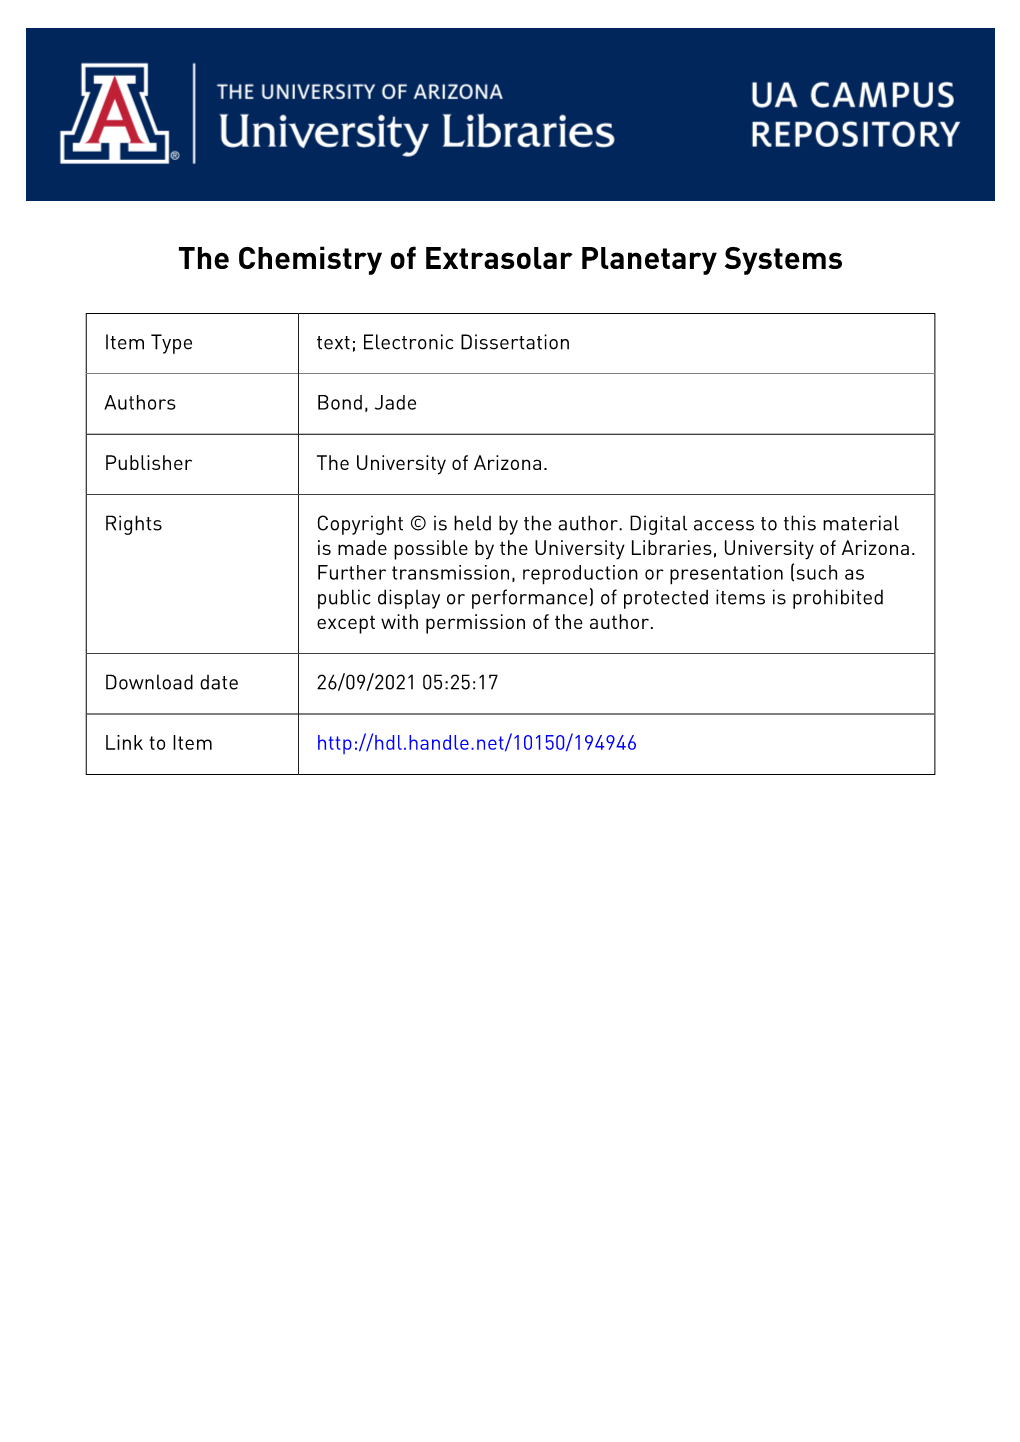 The Chemistry of Extrasolar Planetary Systems